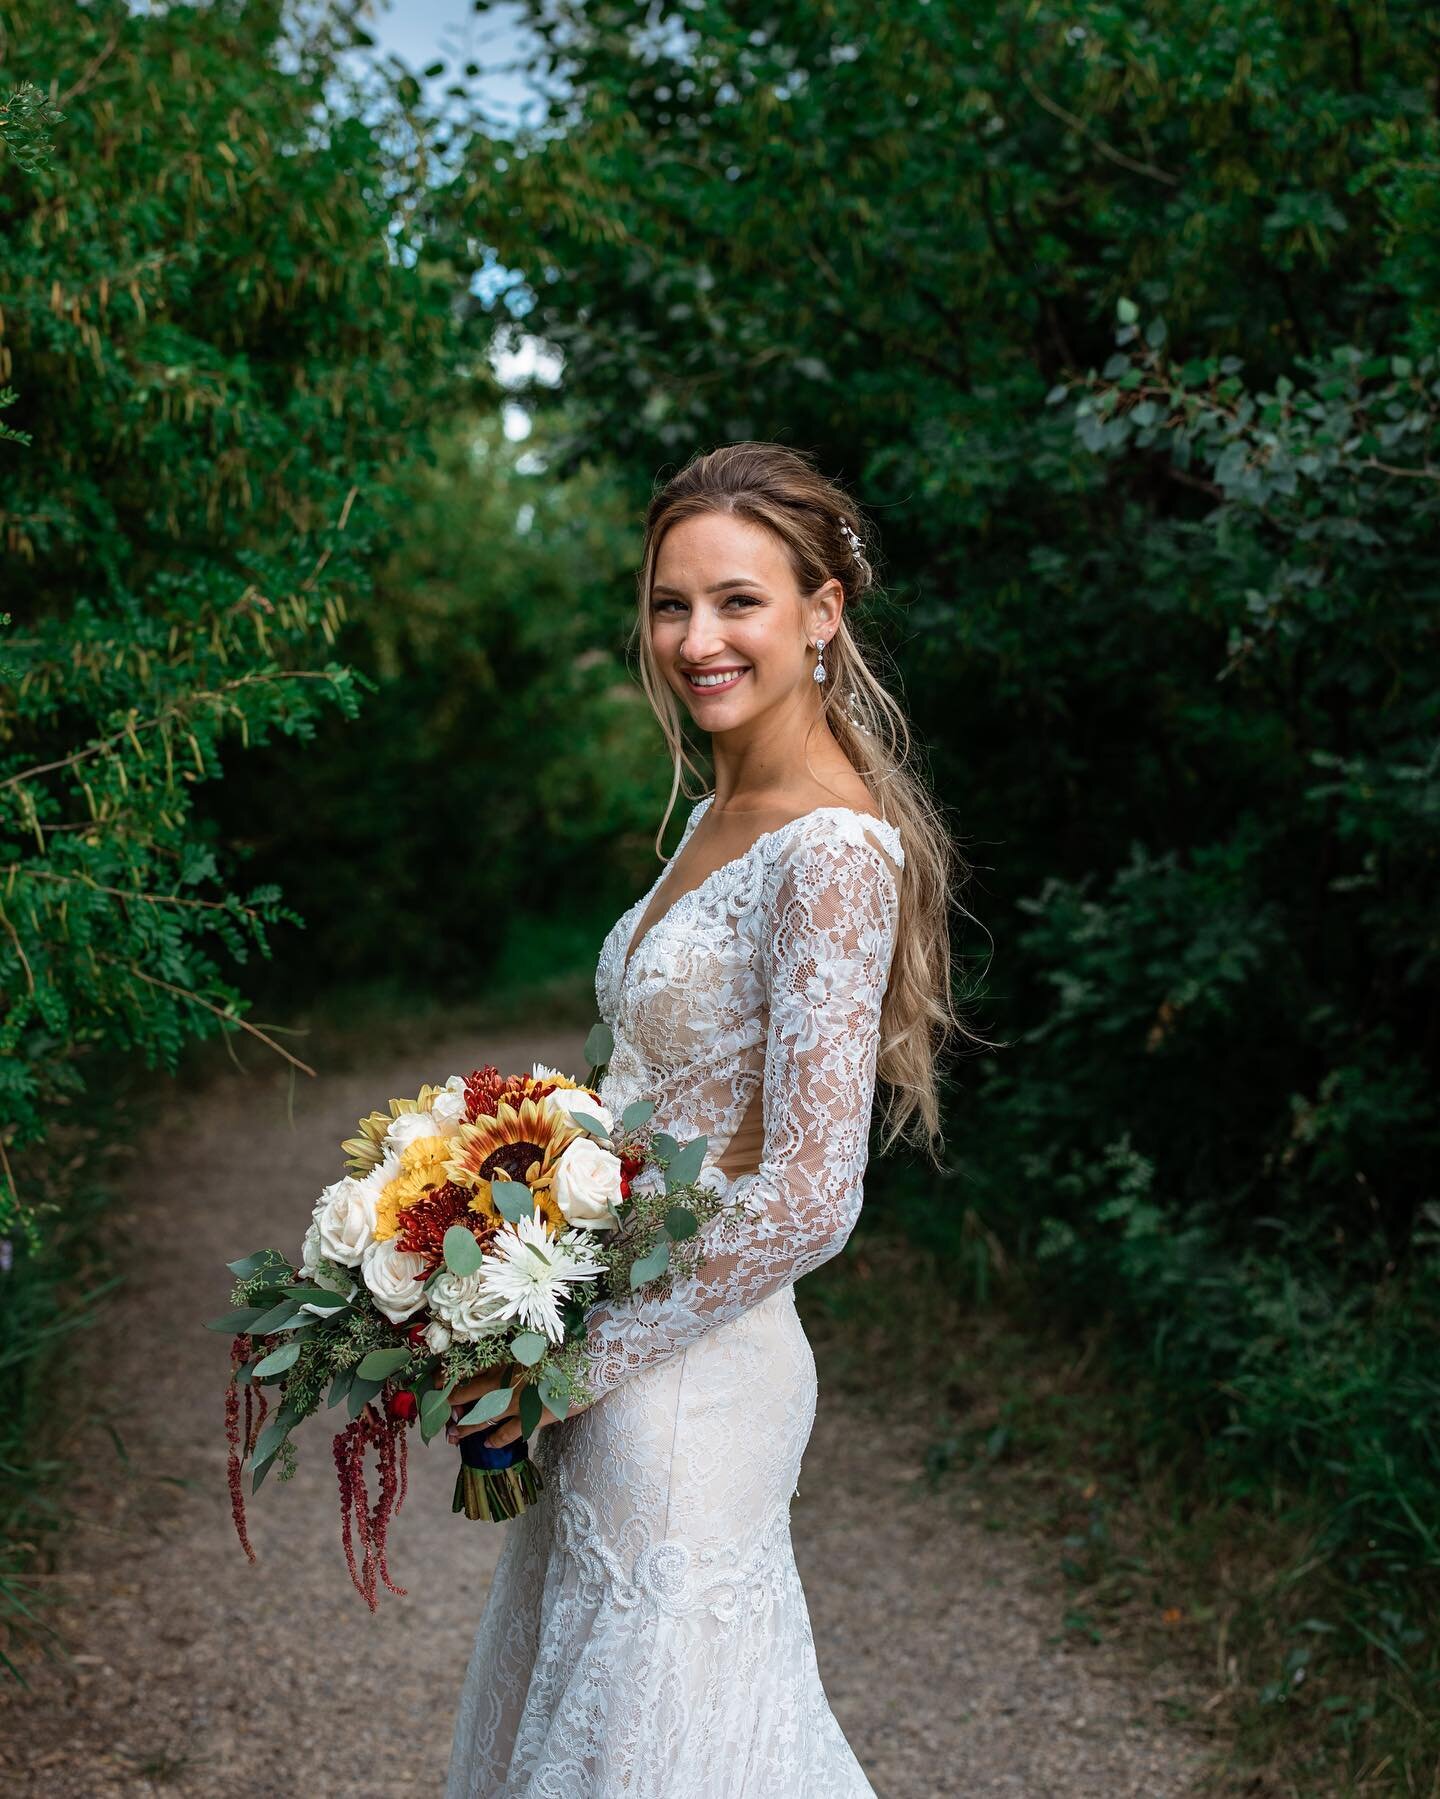 Stunning! 👰🏼✨ To book your bridal makeup appointment, please visit the link in my bio or www.cassandramariamakeup.com - I have limited availability left for 2021 and am starting to book into 2022! Don&rsquo;t hesitate to reach out, I&rsquo;m always